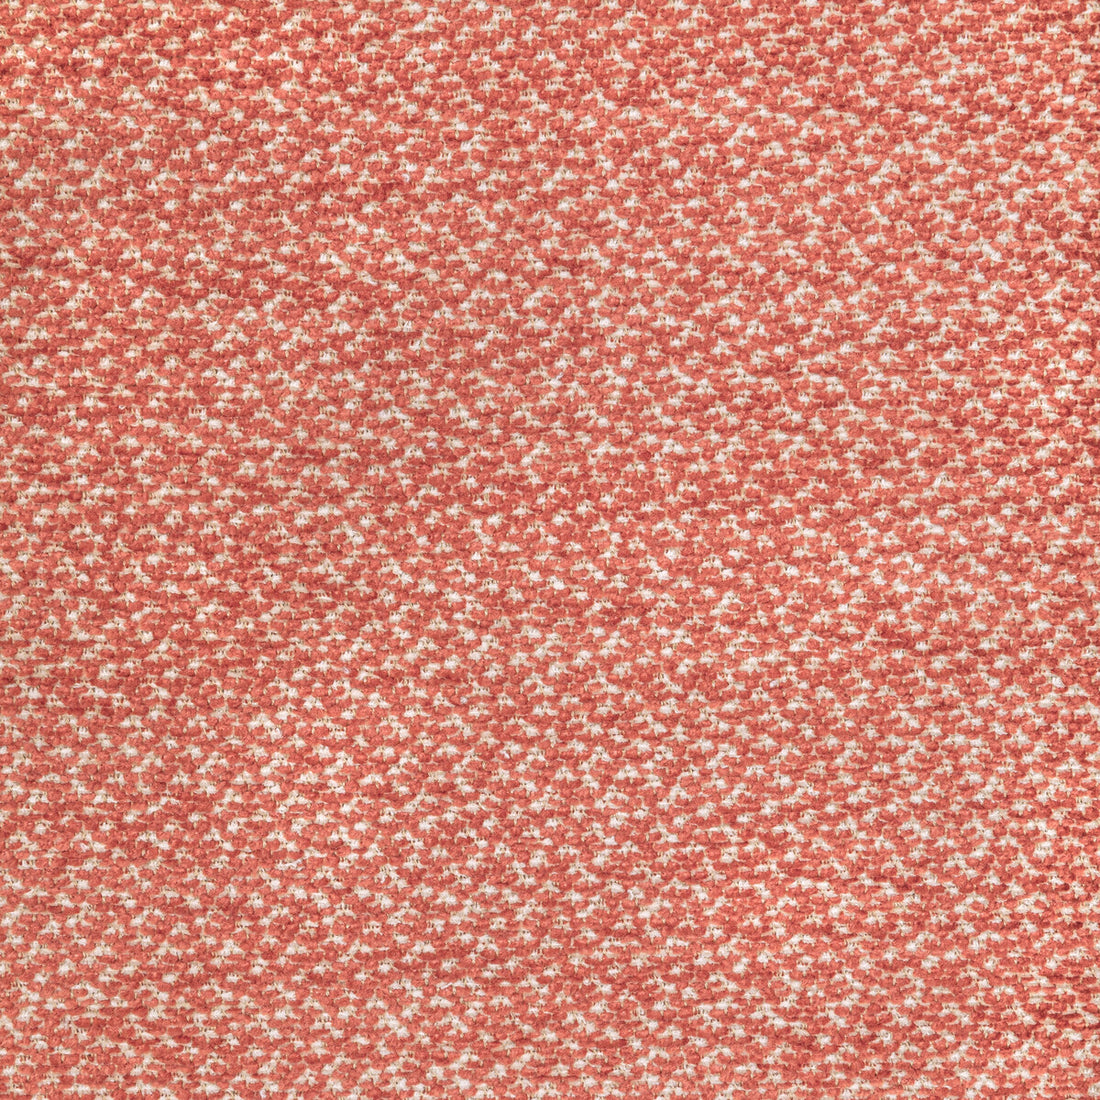 Sasson Texture fabric in coral color - pattern 8022122.12.0 - by Brunschwig &amp; Fils in the Chambery Textures III collection